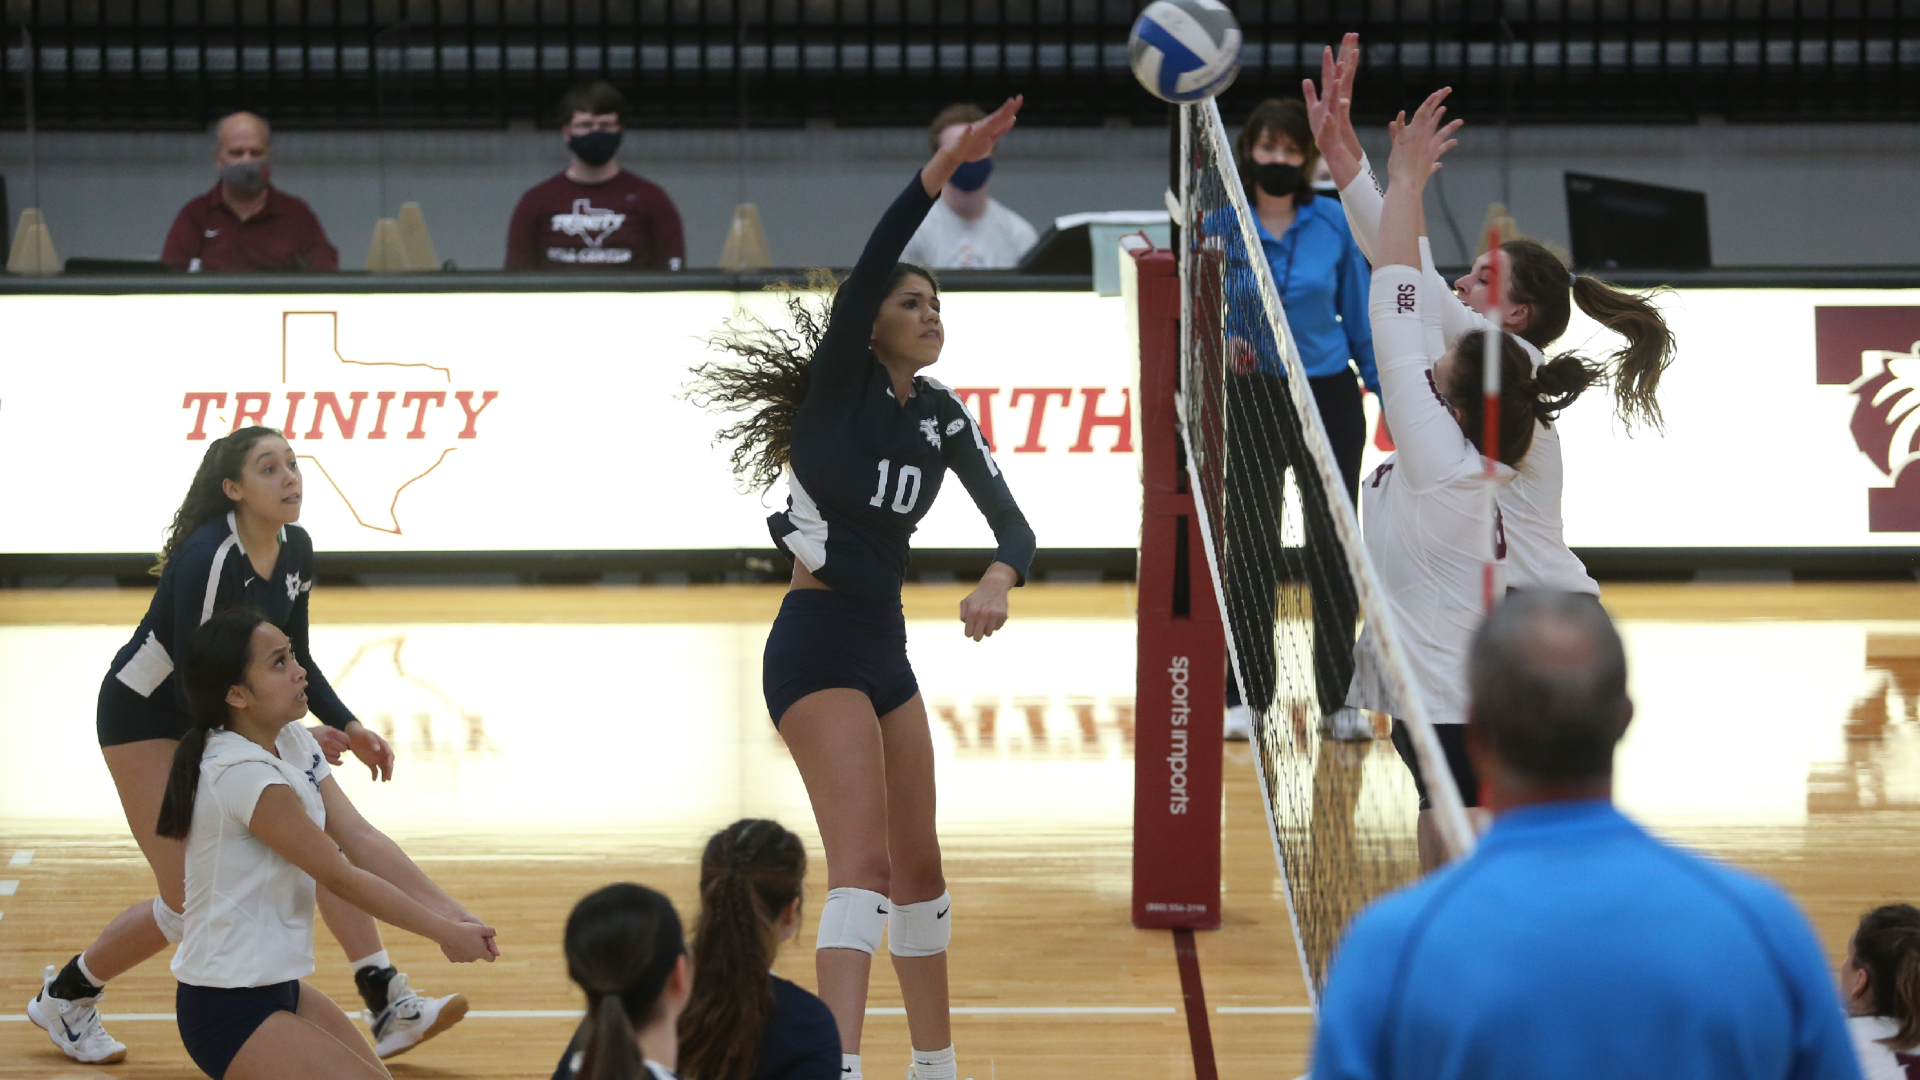 UD Volleyball Takes 8th Seed in SCAC Tournament after Finishing Regular Season at TLU on Saturday